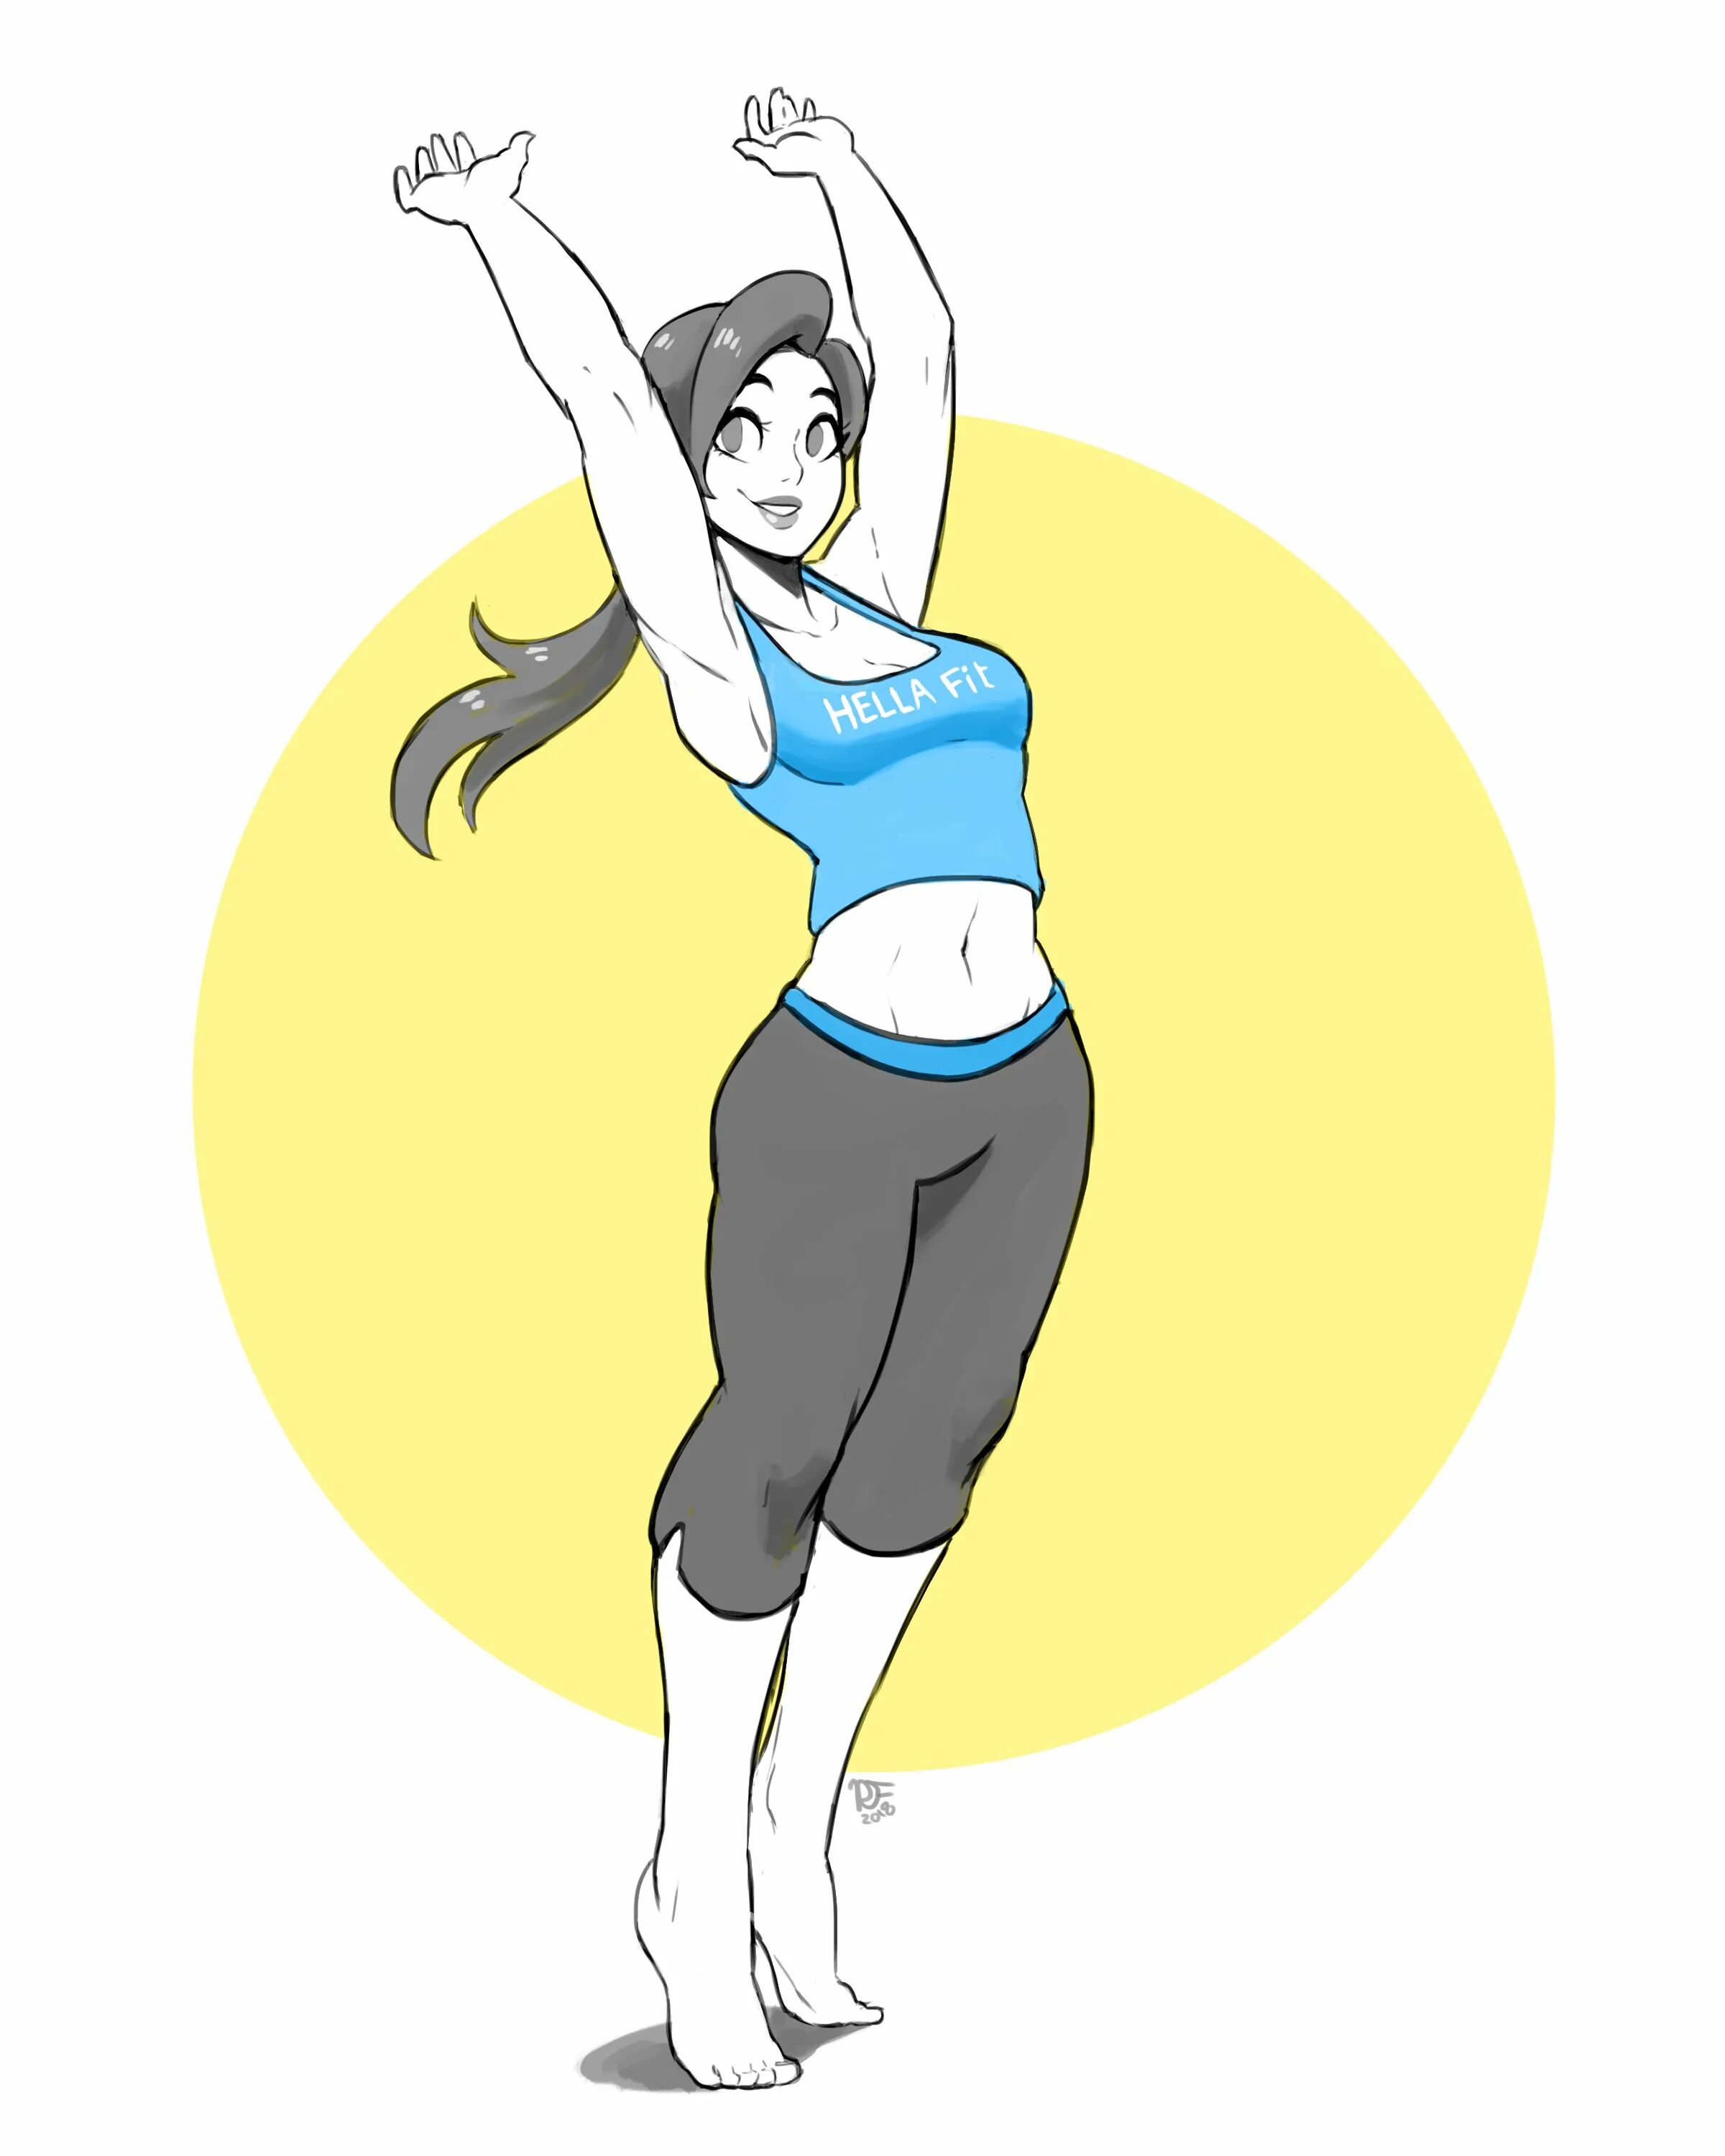 Тренер Wii Fit Art. Wii Fit Trainer арт. Nintendo Wii Fit Trainer. Wii Fit Trainer арт 18.